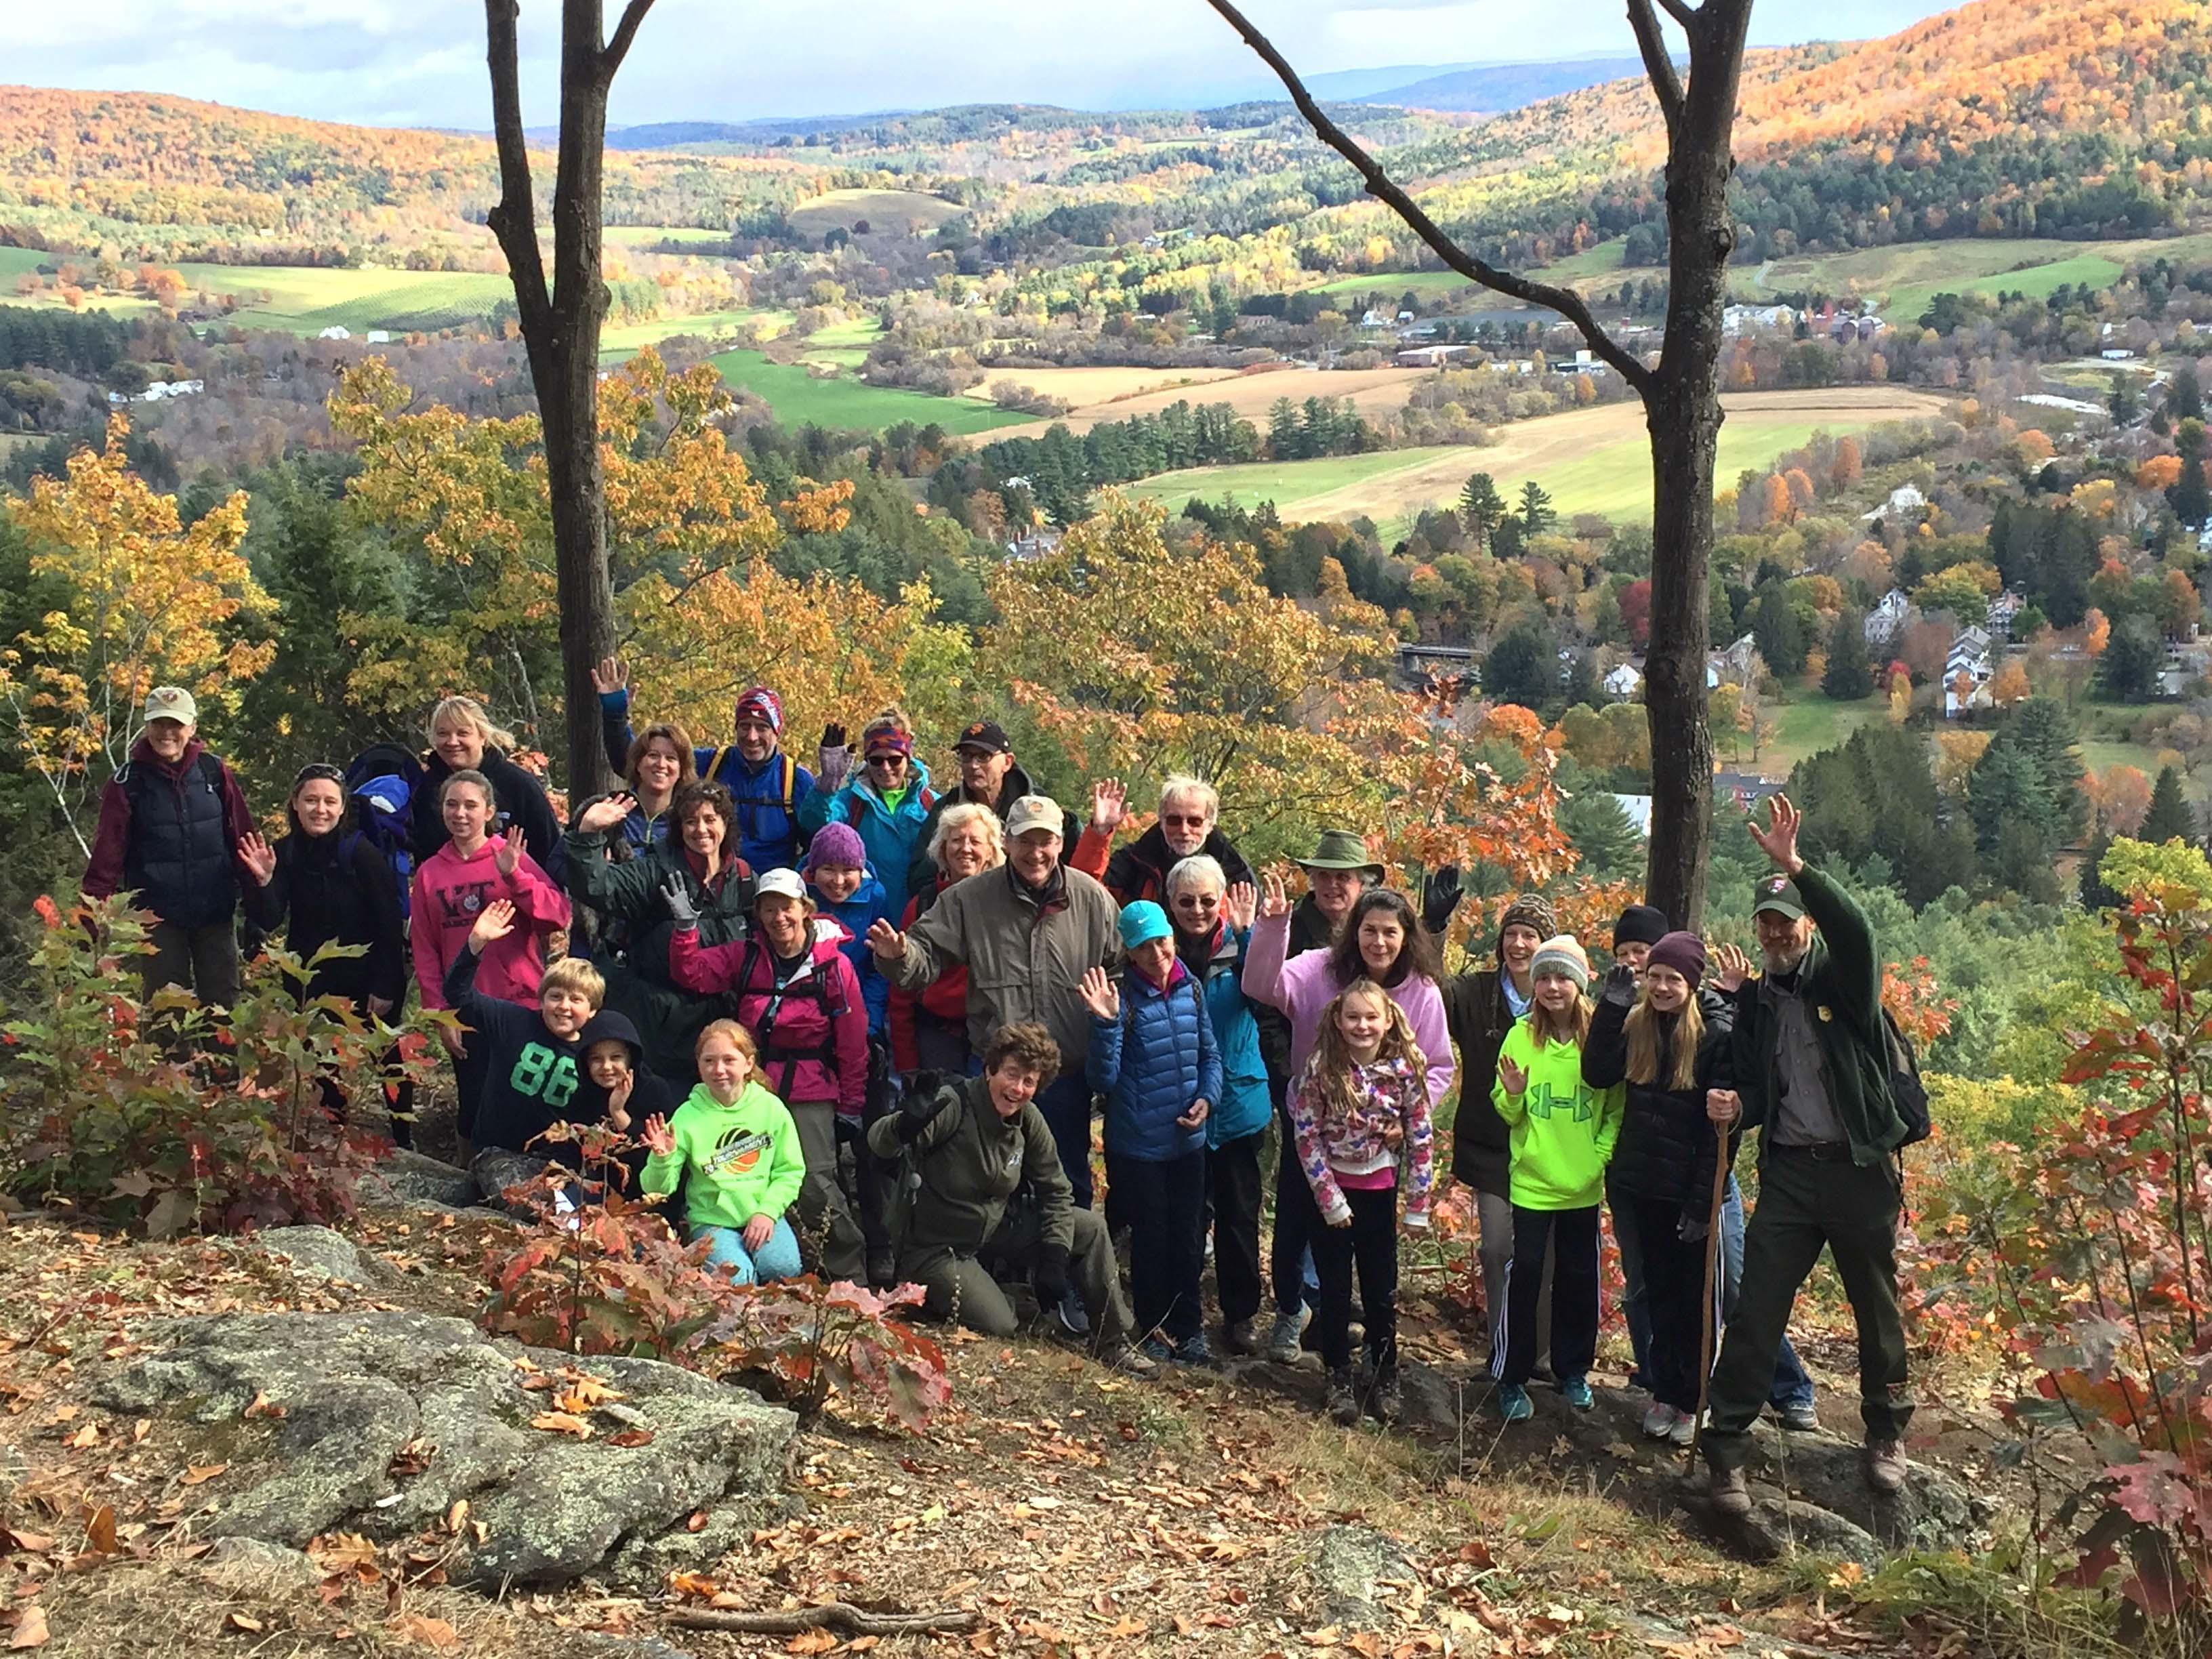 Hikers enjoying fall foliage during a park event